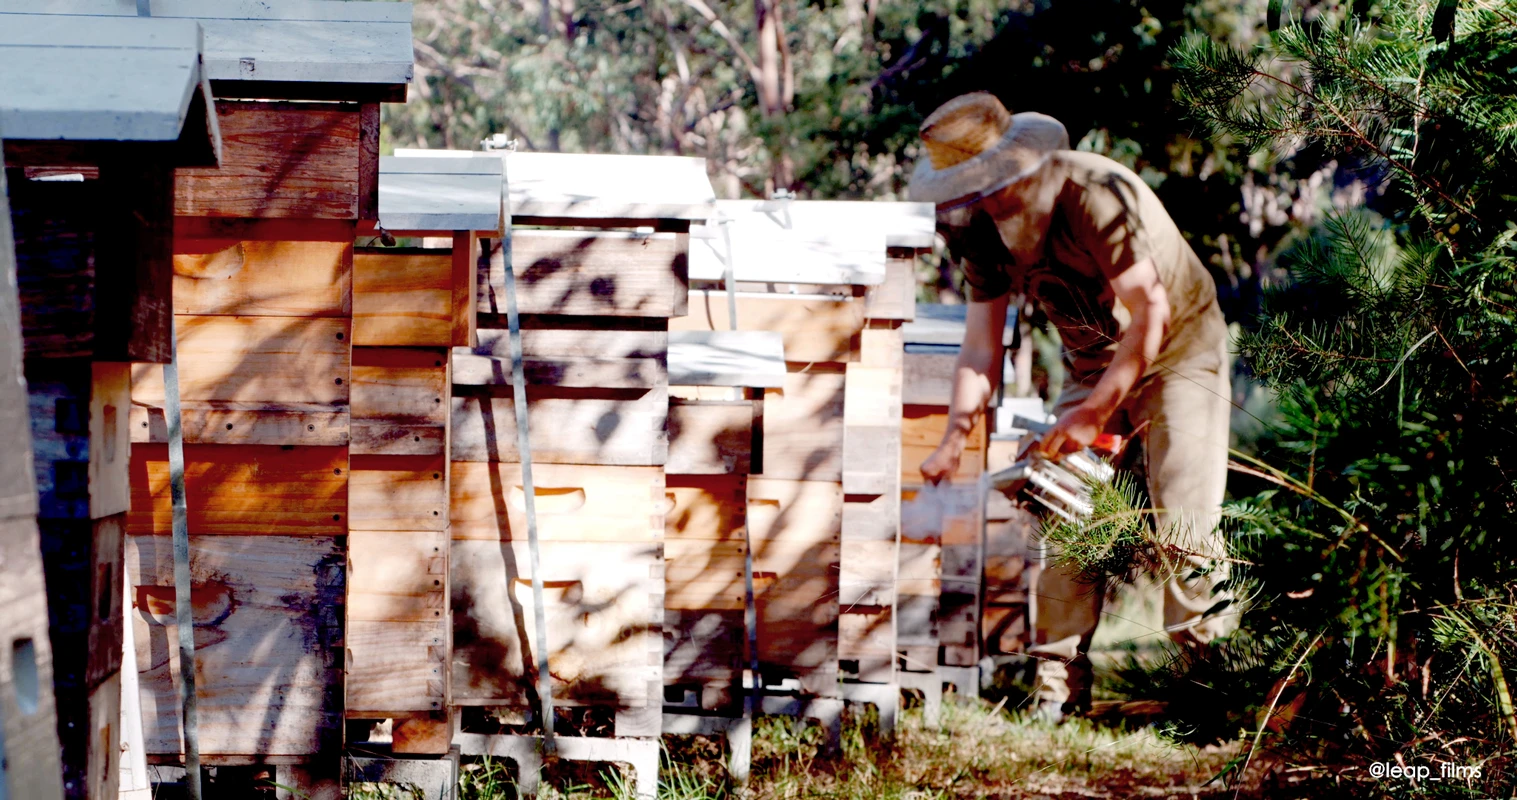 Malfroy's Gold, Beronia Blossom at one of ourBlue Mountains apiaries this spring